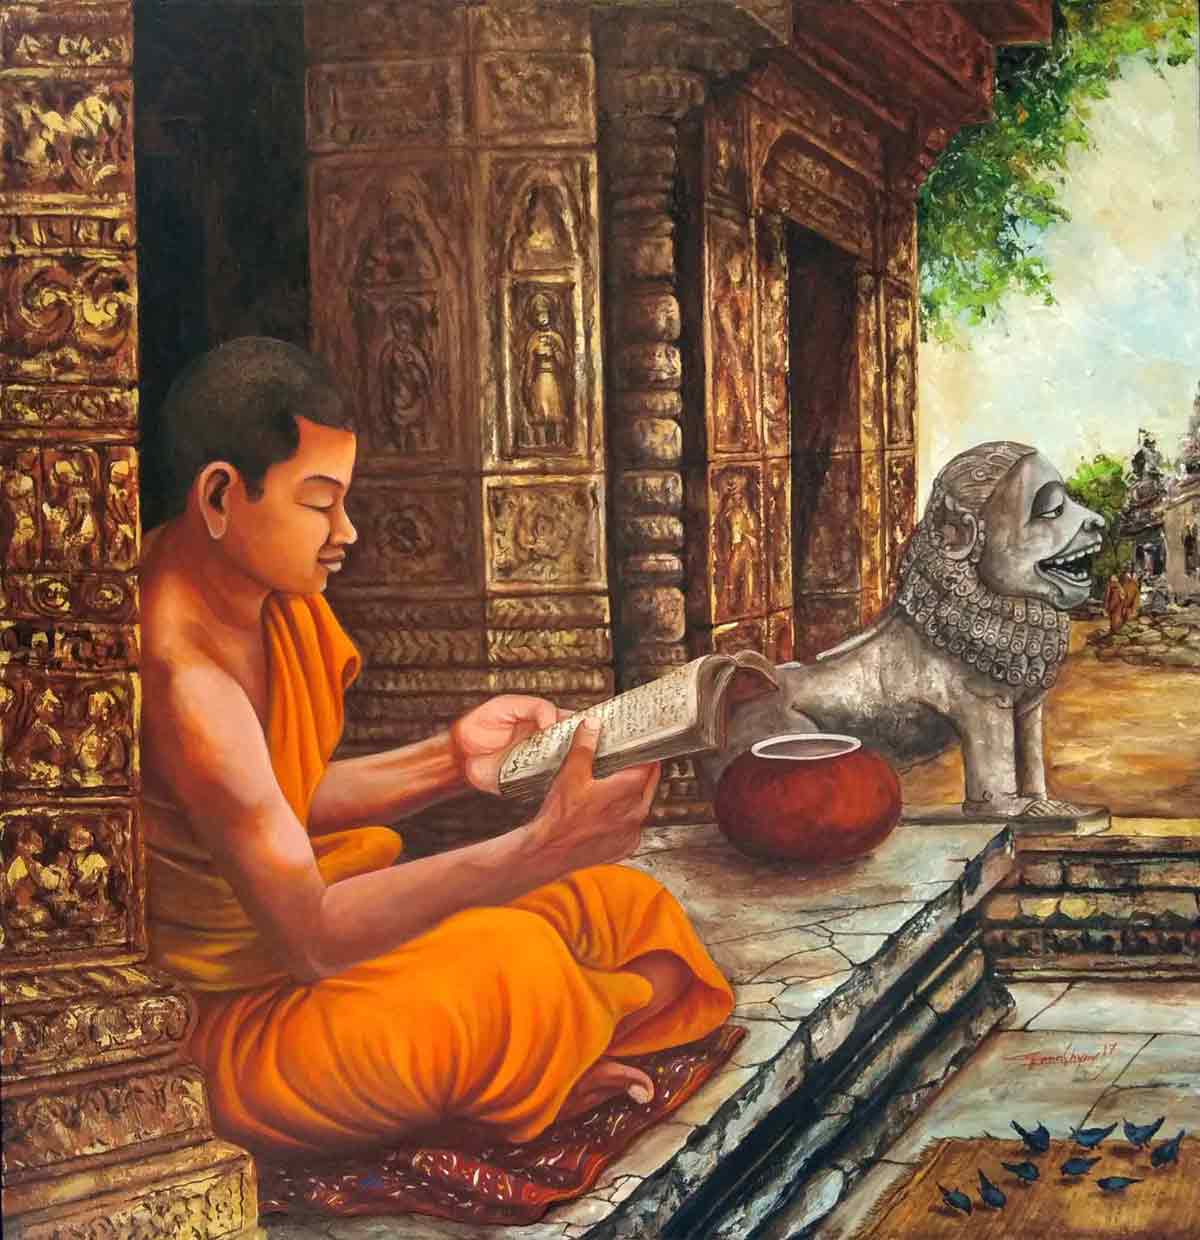 Realism Painting with Acrylic on Canvas "Angkor Wat - 5" art by Ghanshyam Kashyap